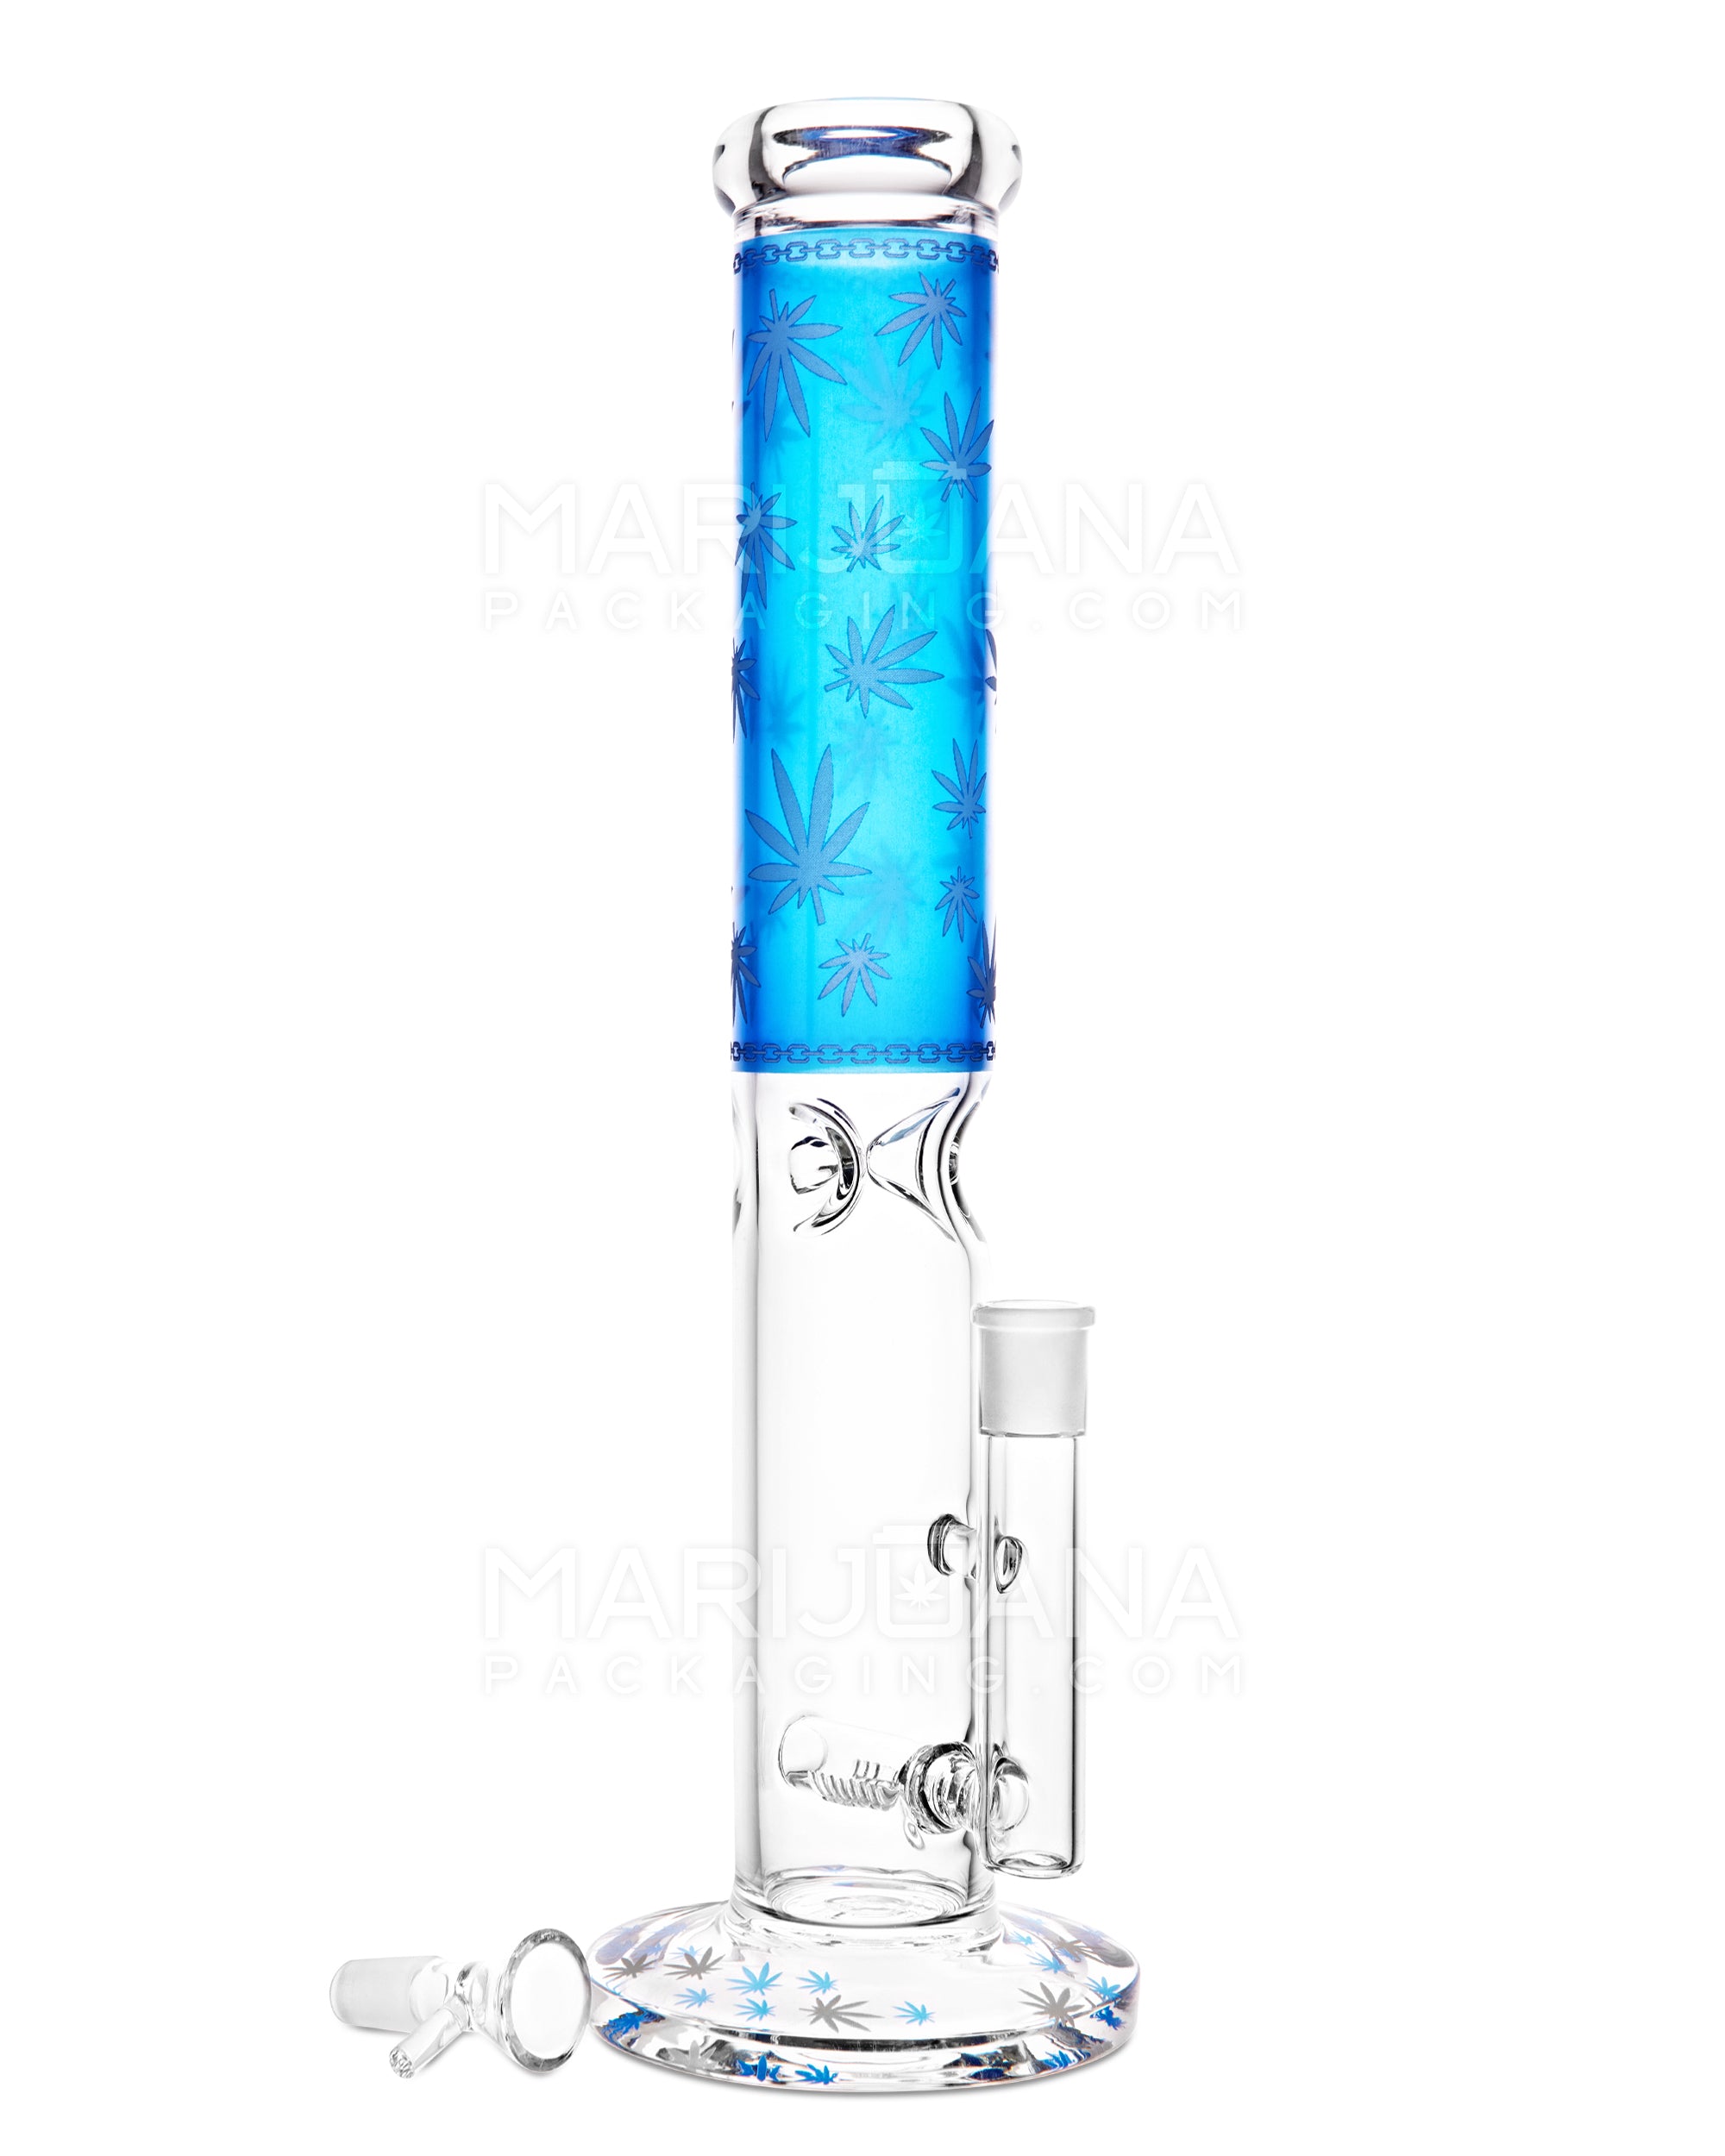 Straight Neck Leaf Decal Inline Perc Glass Water Pipe w/ Ice Catcher | 14in Tall - 14mm Bowl - Blue - 2